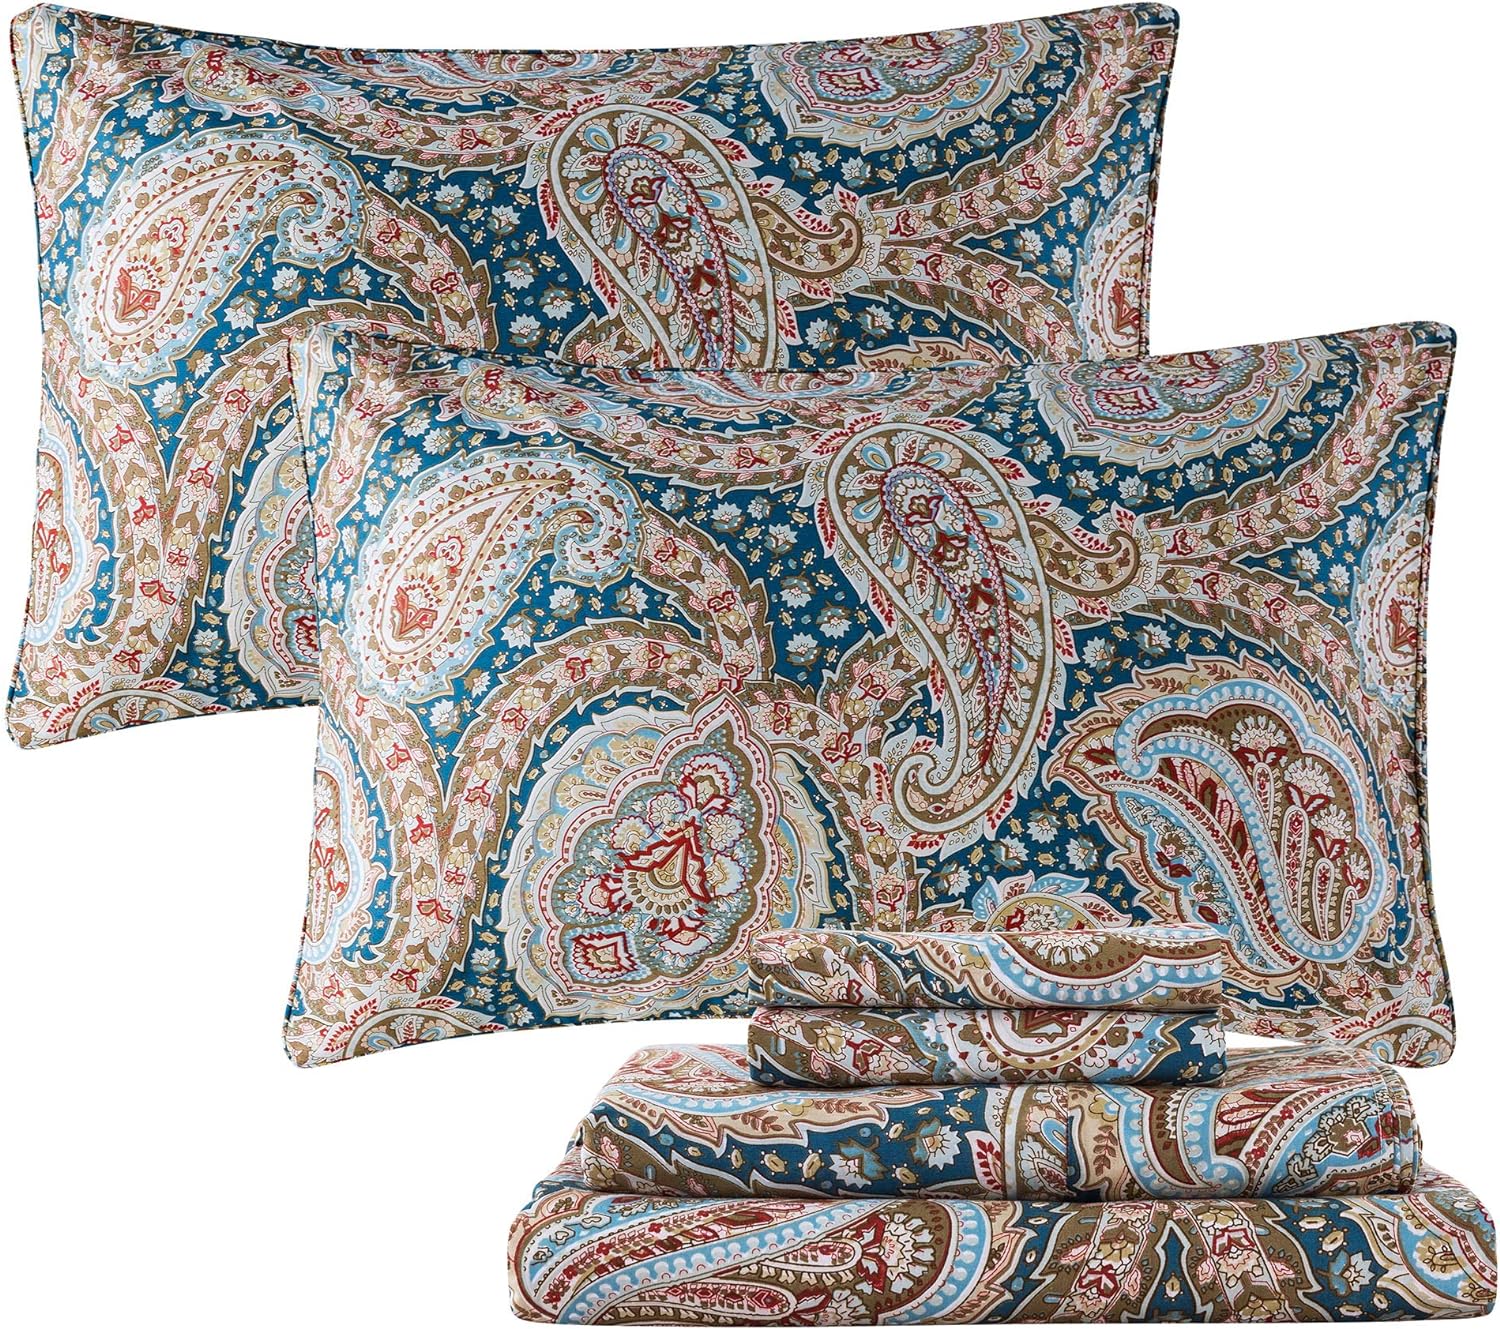 FADFAY Luxury Paisley Sheets Set Twin Classy Blue and Gold Floral Farmhouse Bedding Elegent Blue Paisley Bedding Set 100% Cotton Super Soft Hypoallergenic Deep Pocket Fitted Sheet 4-Pieces, Twin Size